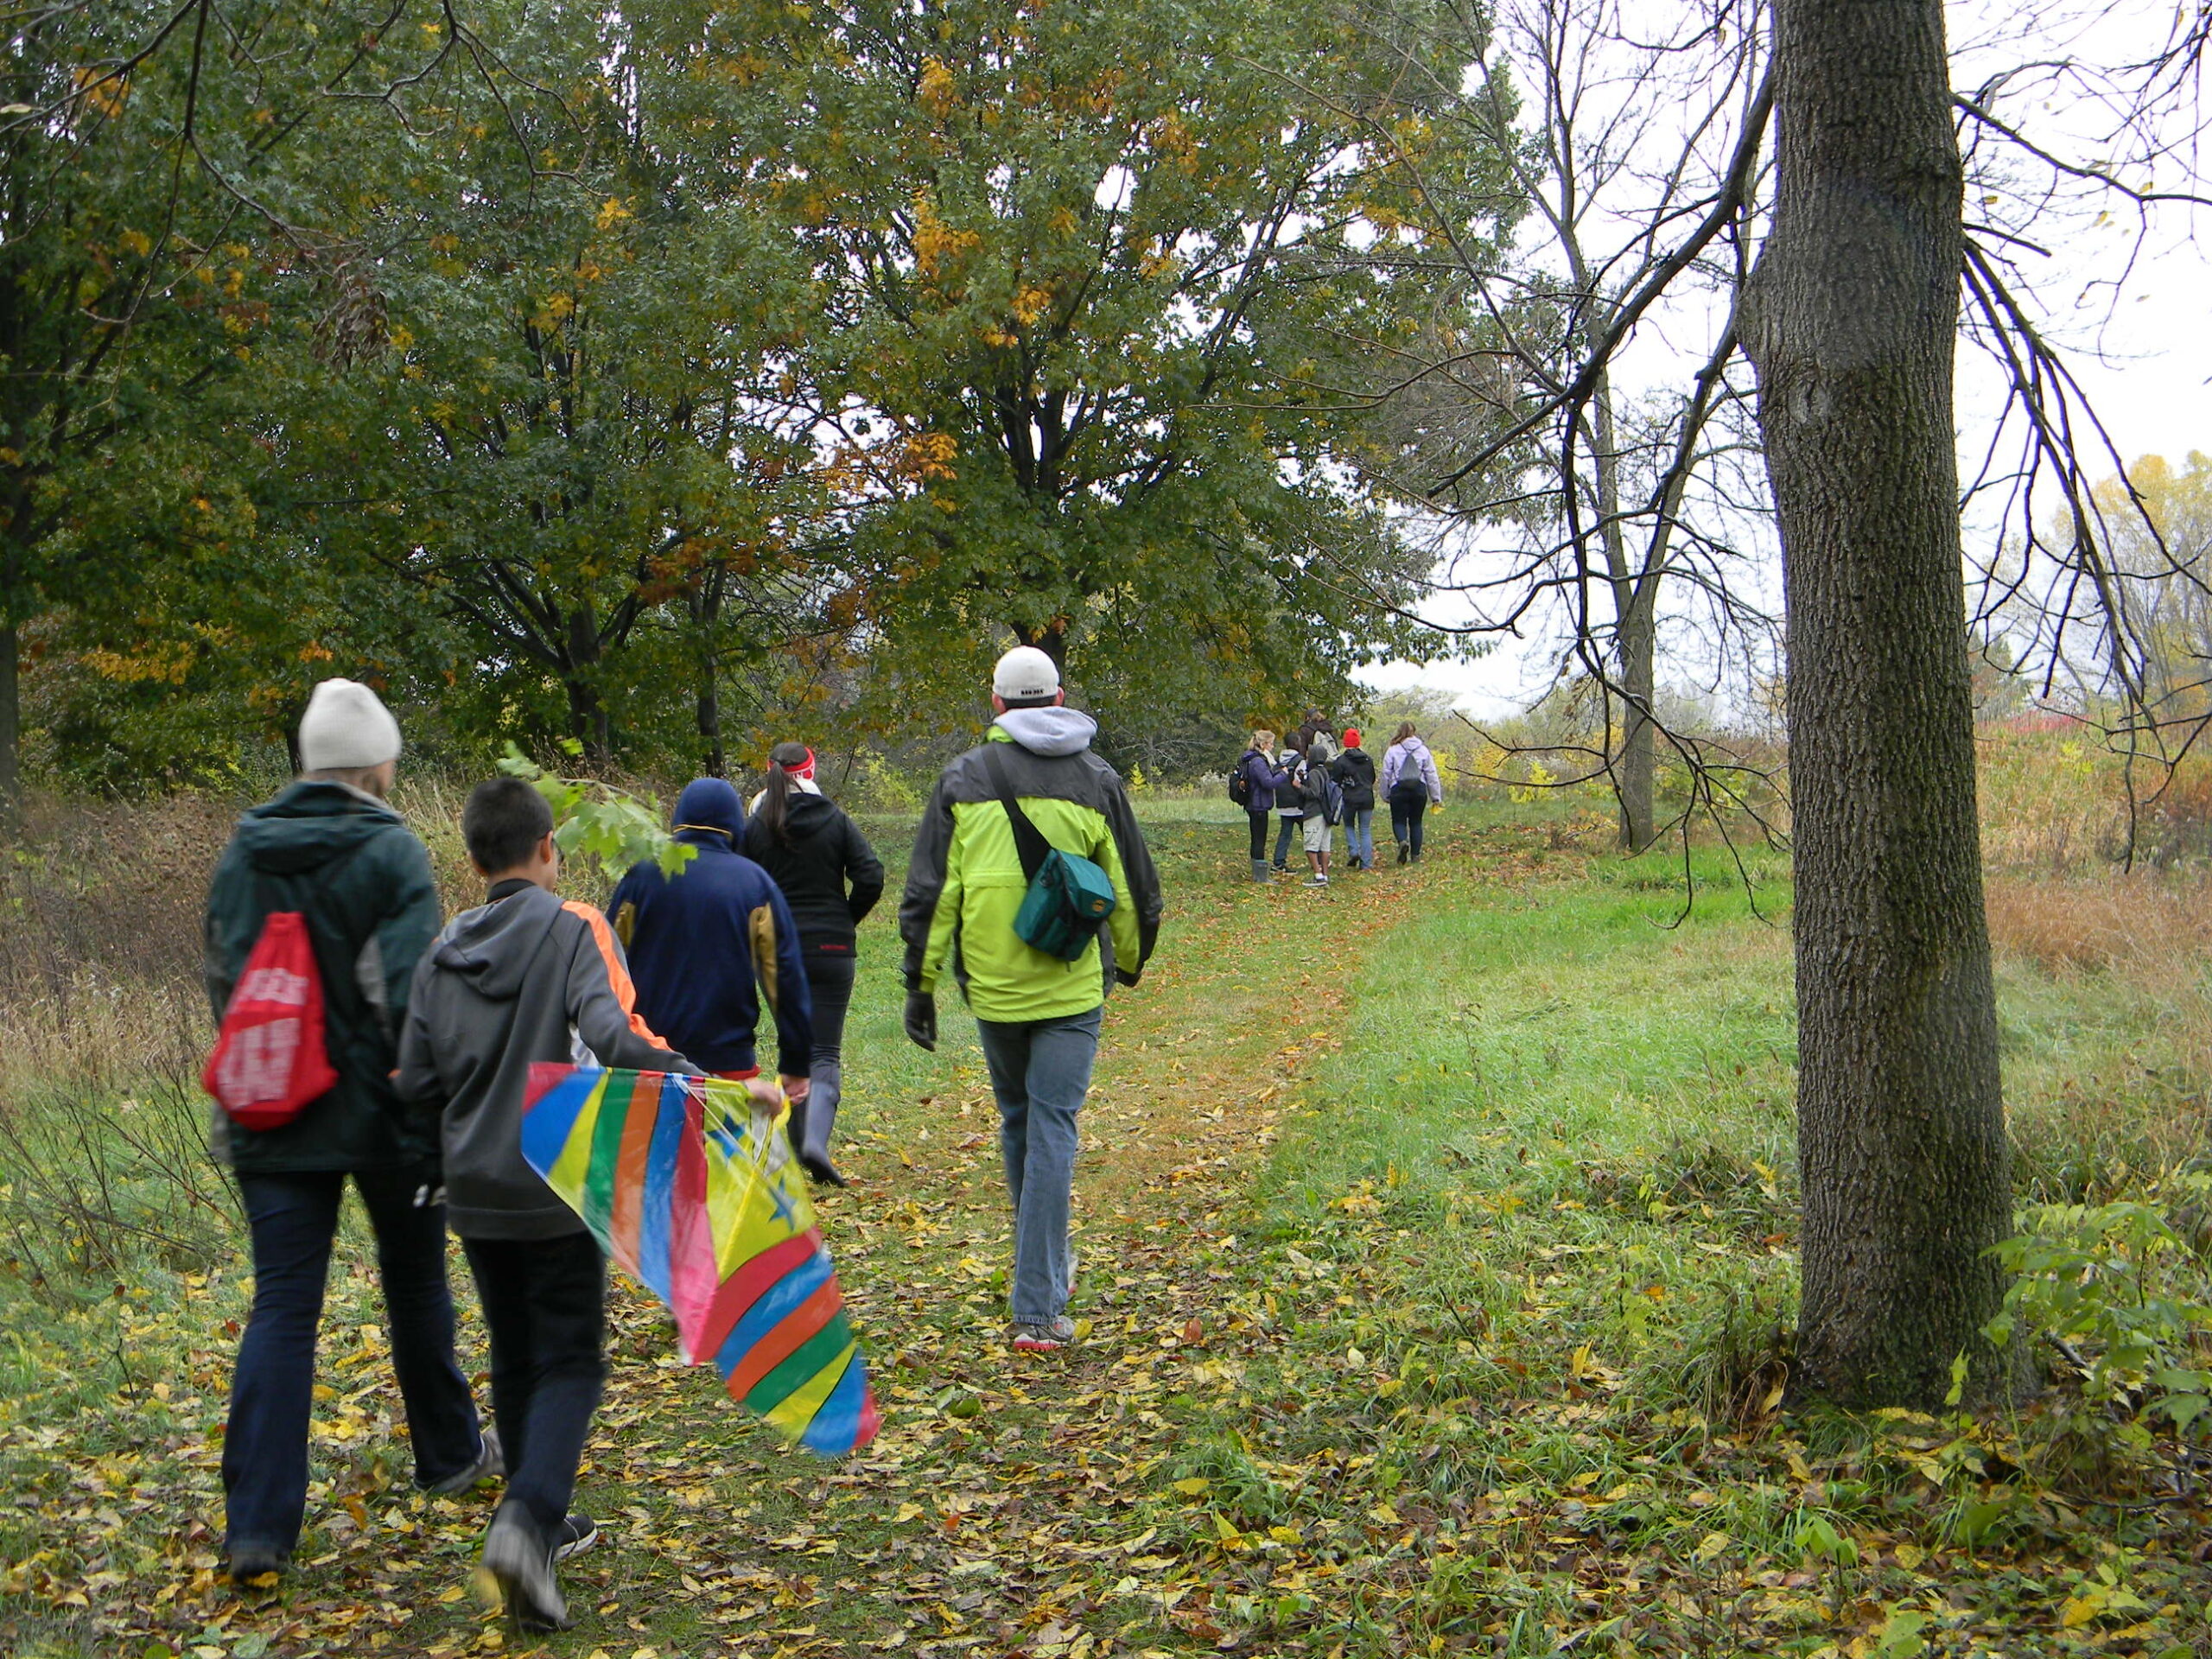 A group of people walk on a grassy path wearing hats and coats. One is carrying a colorful kite.